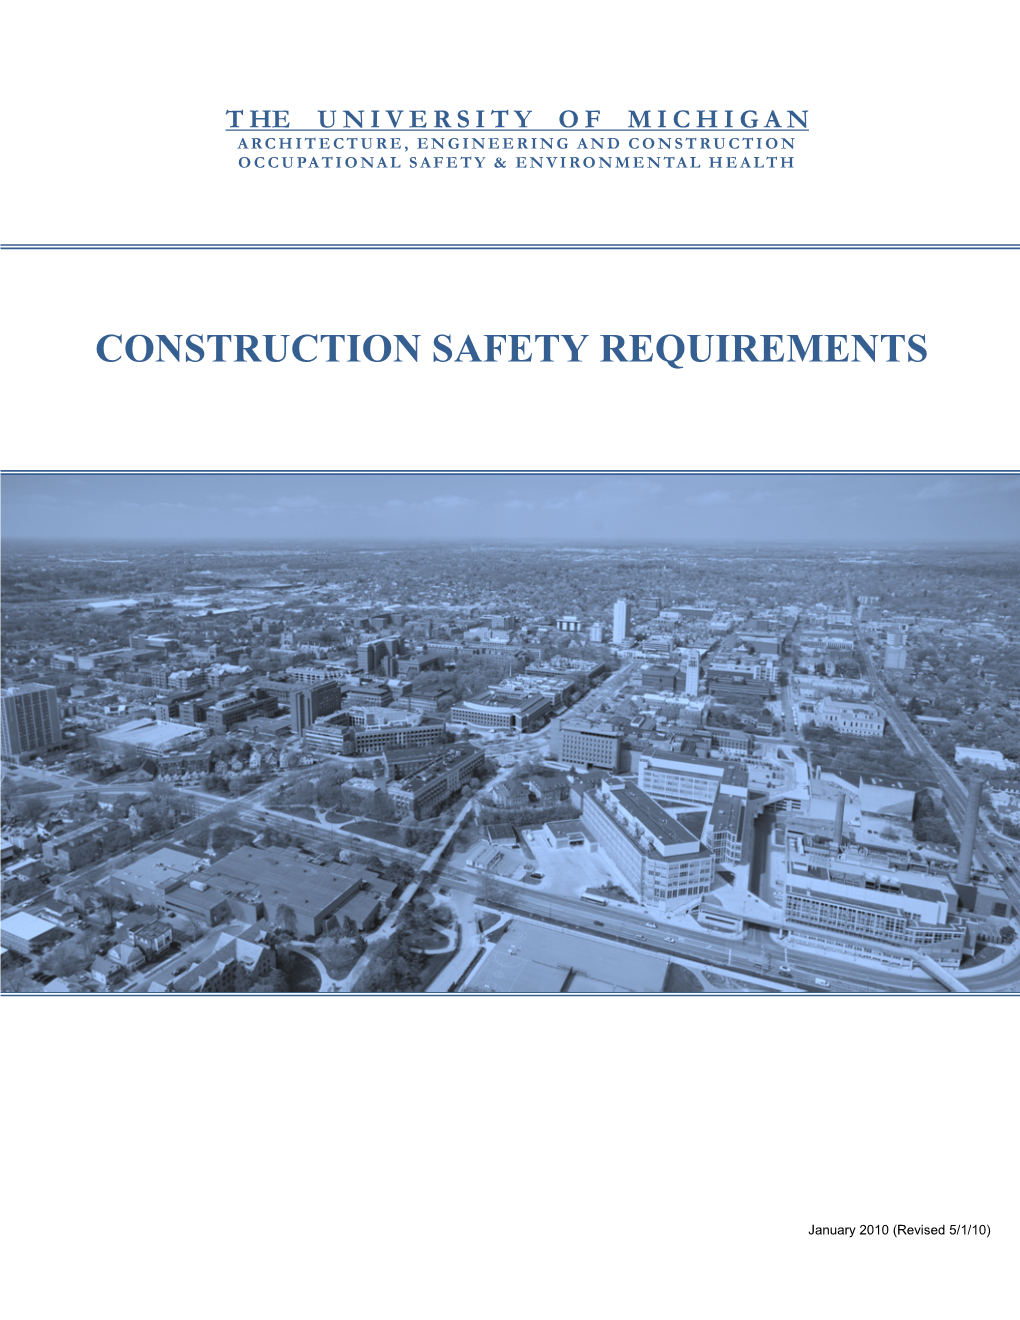 Construction Safety Requirements